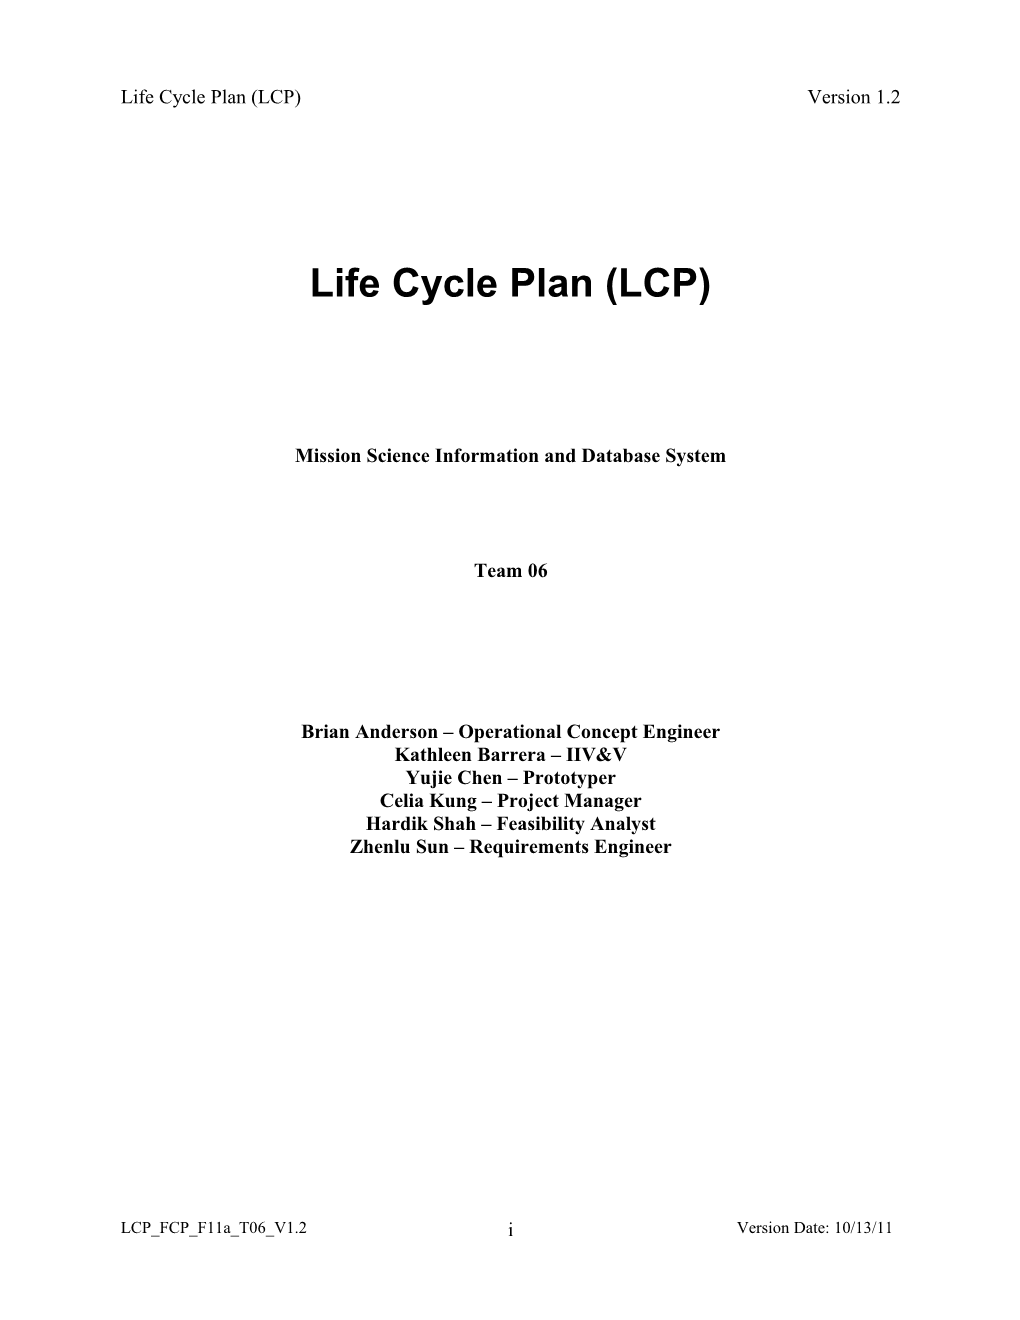 Life Cycle Plan (LCP) s8